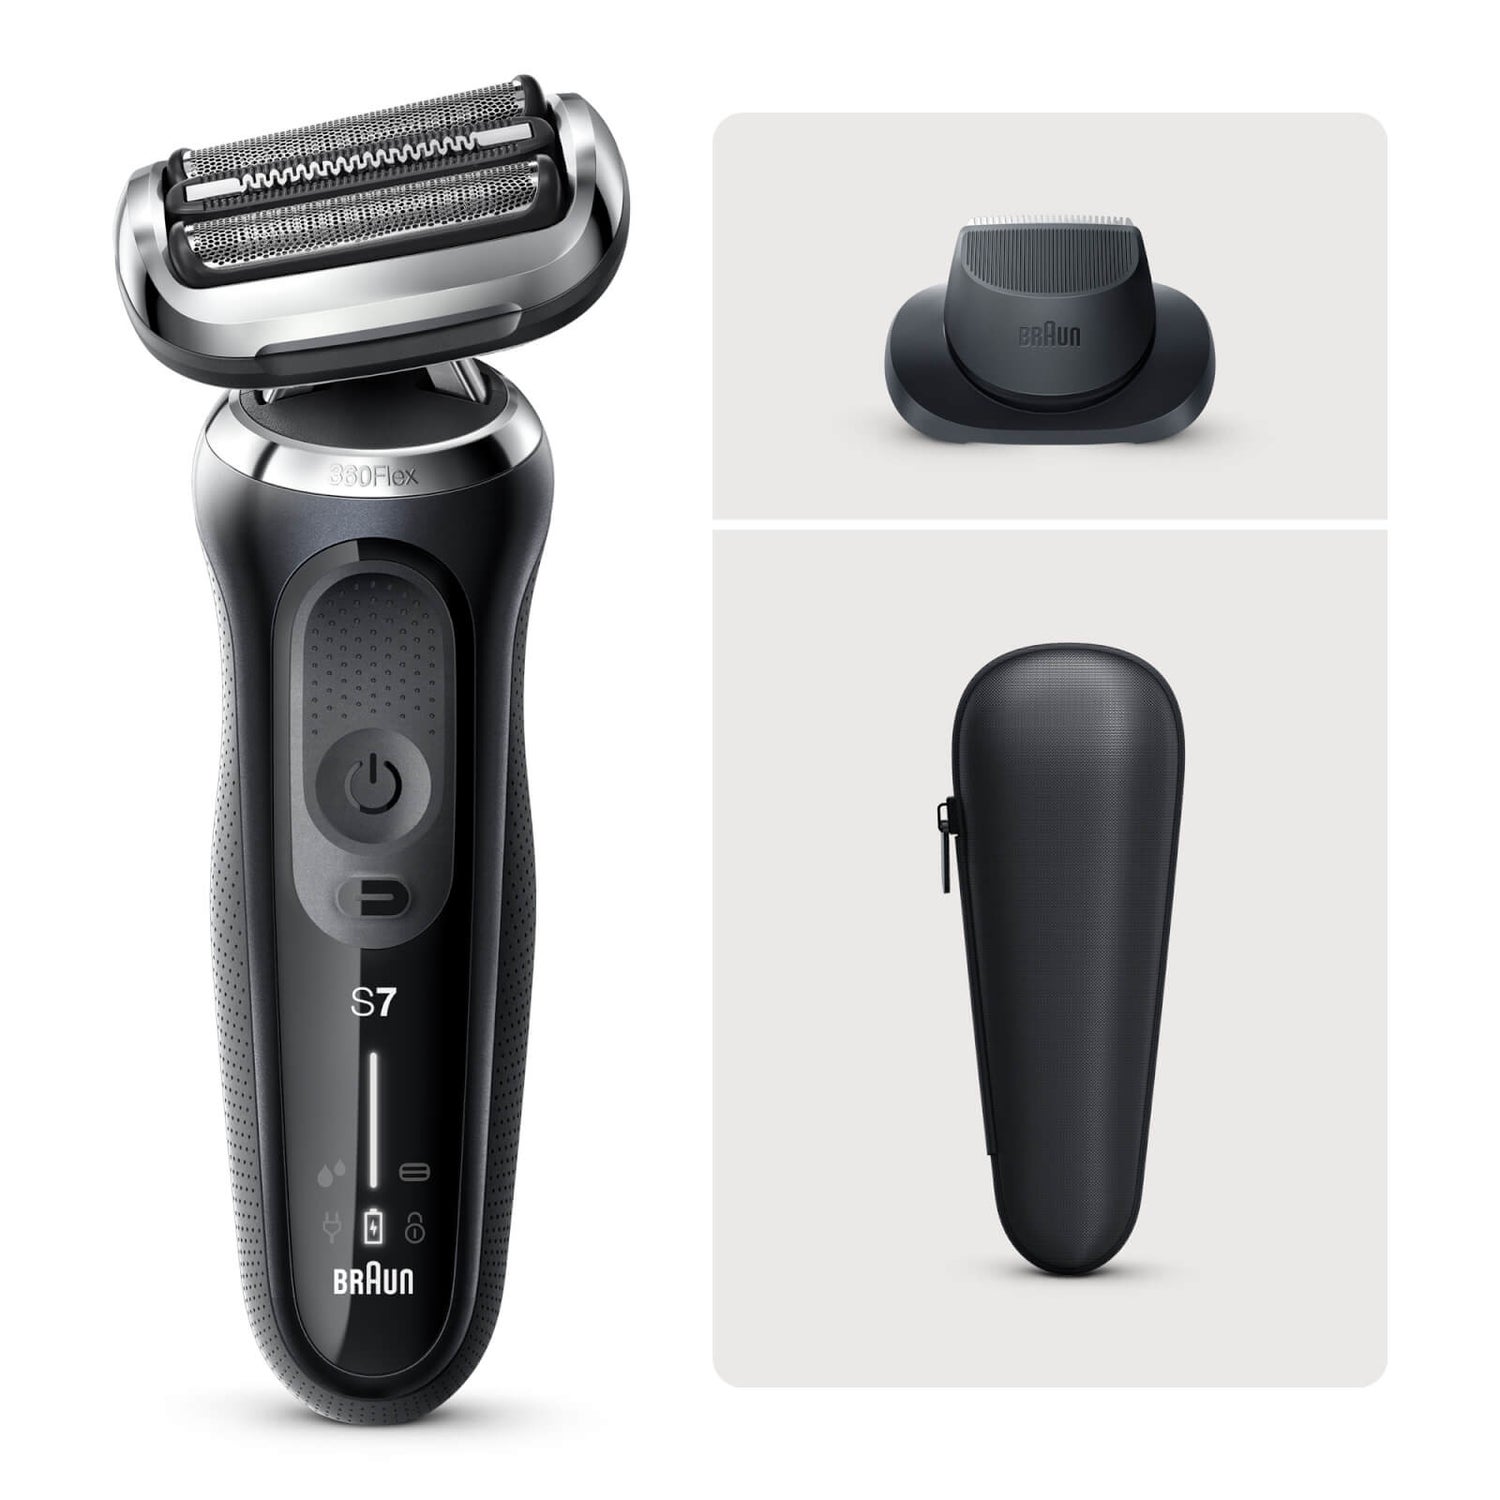 Braun Series 7 Electric Shaver with Precision Trimmer and Body Groomer Bundle